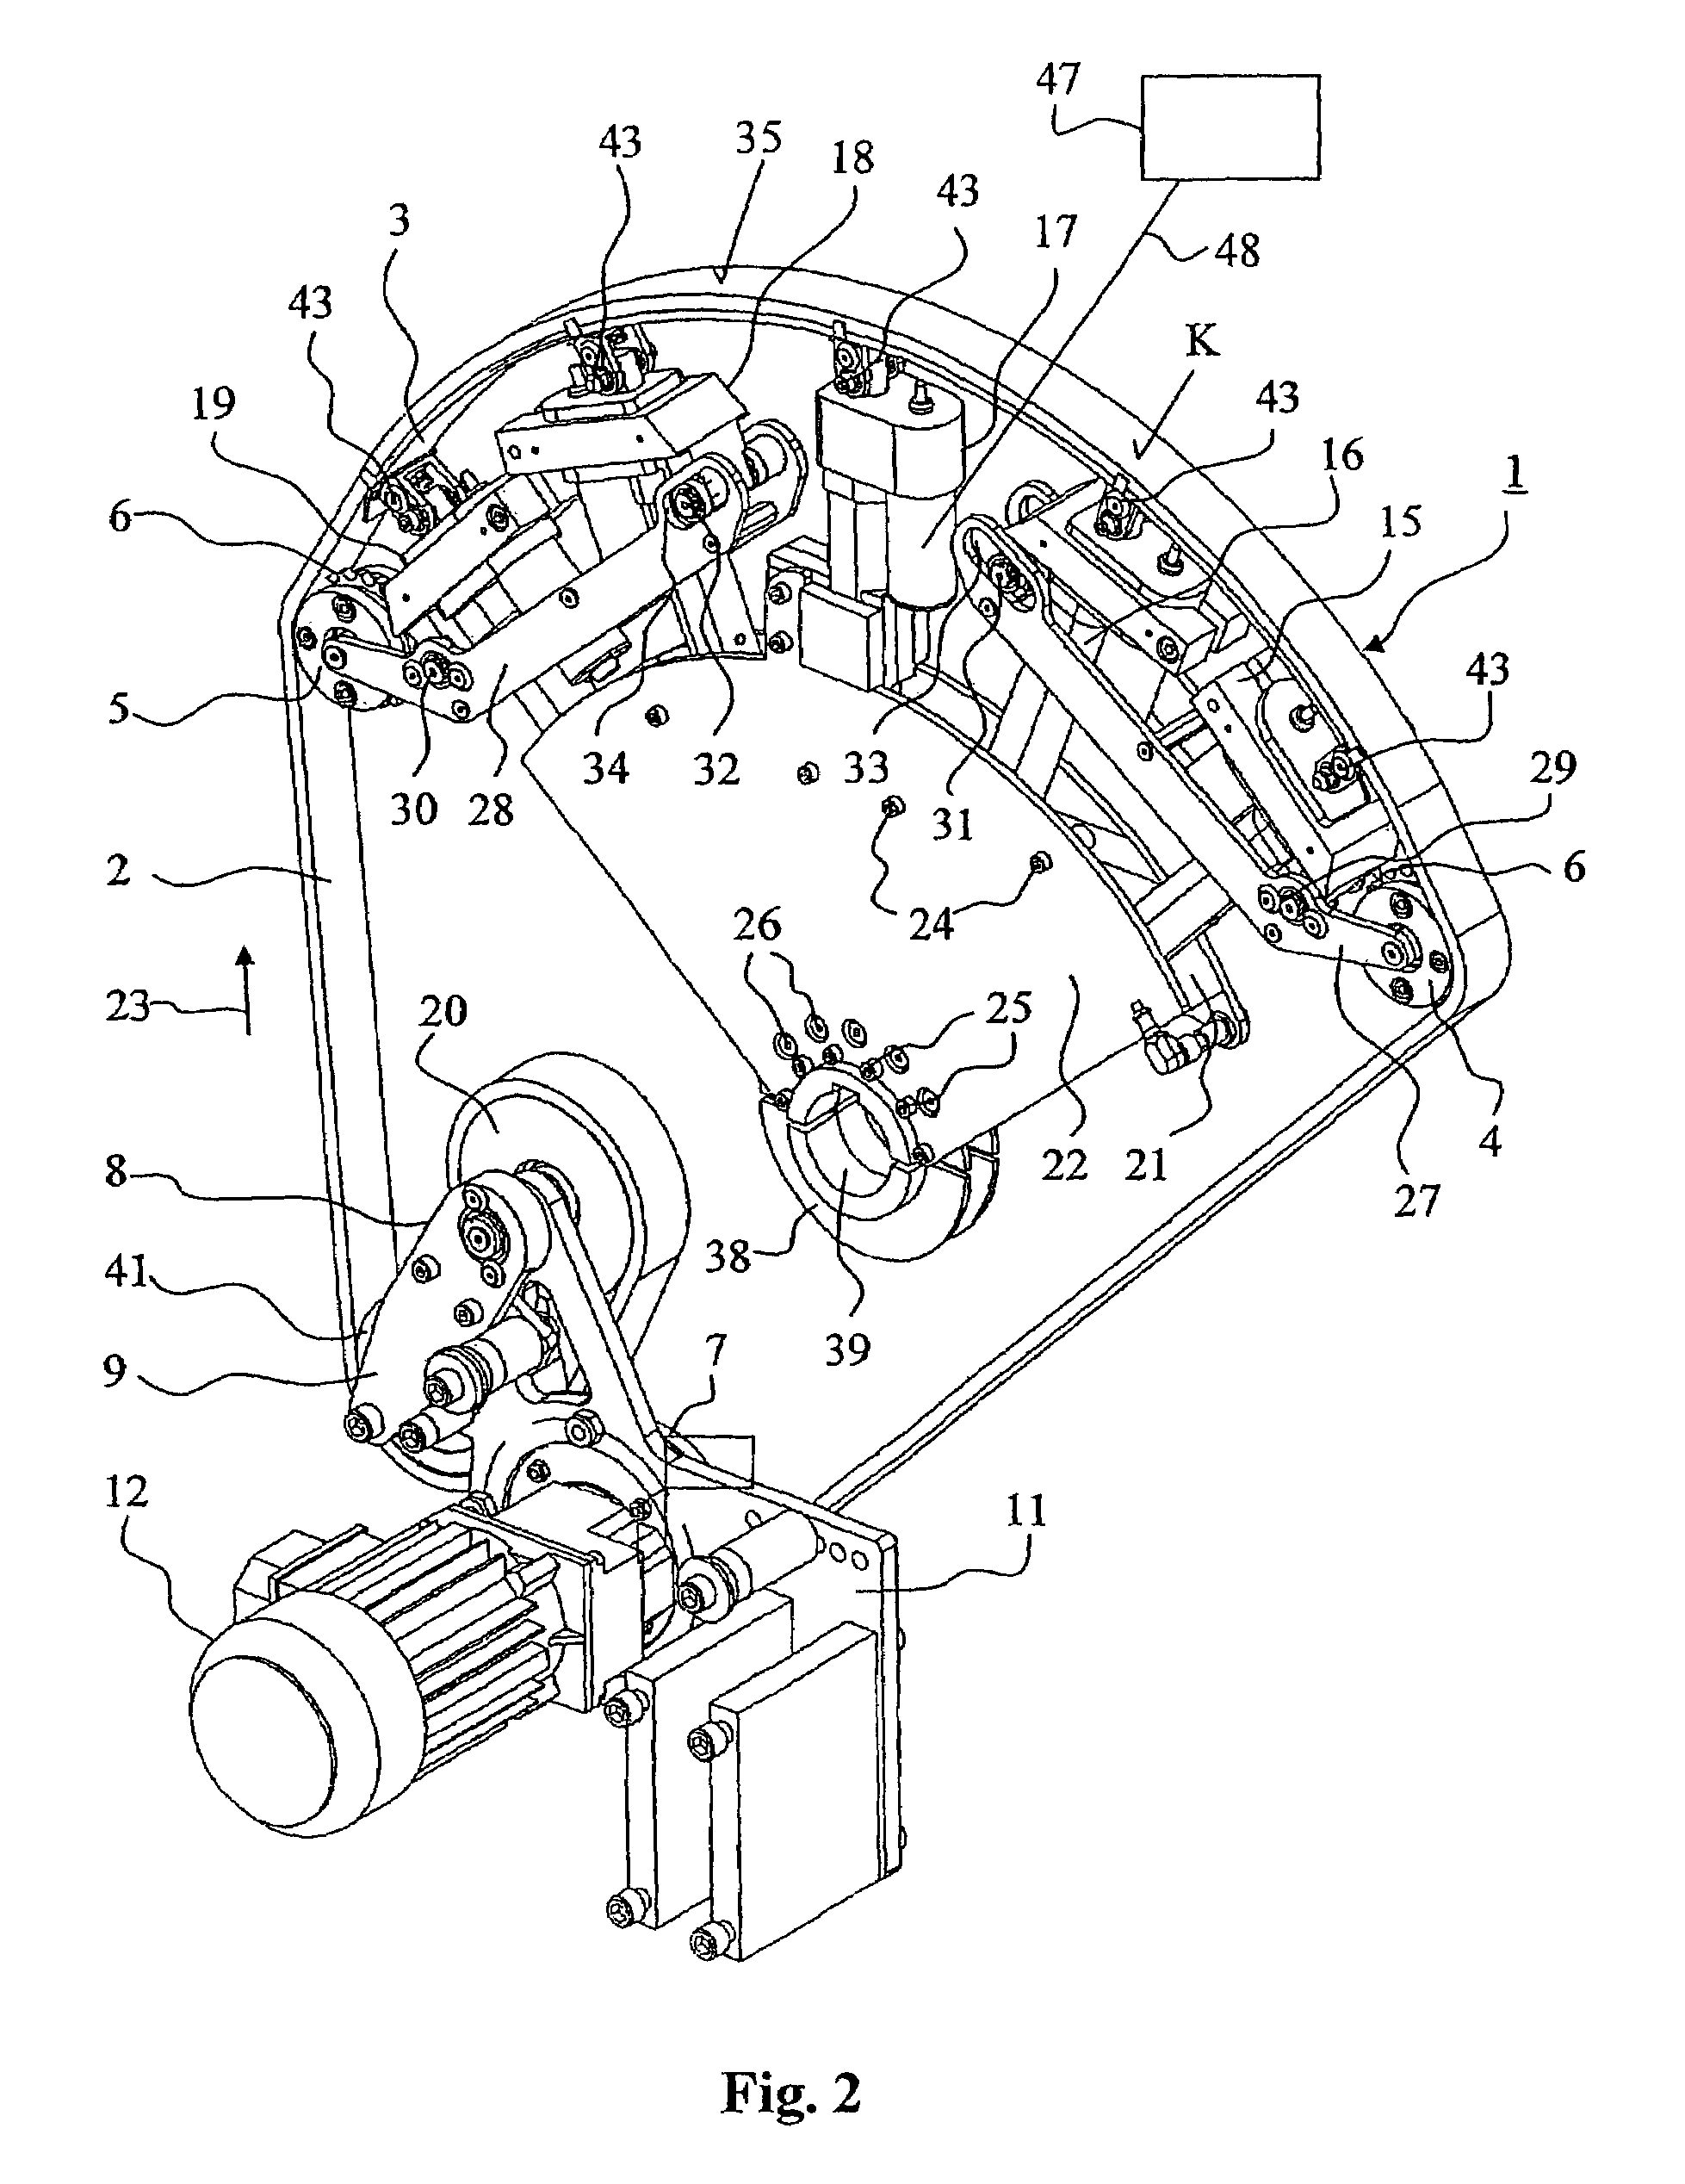 Apparatus for trimming print products